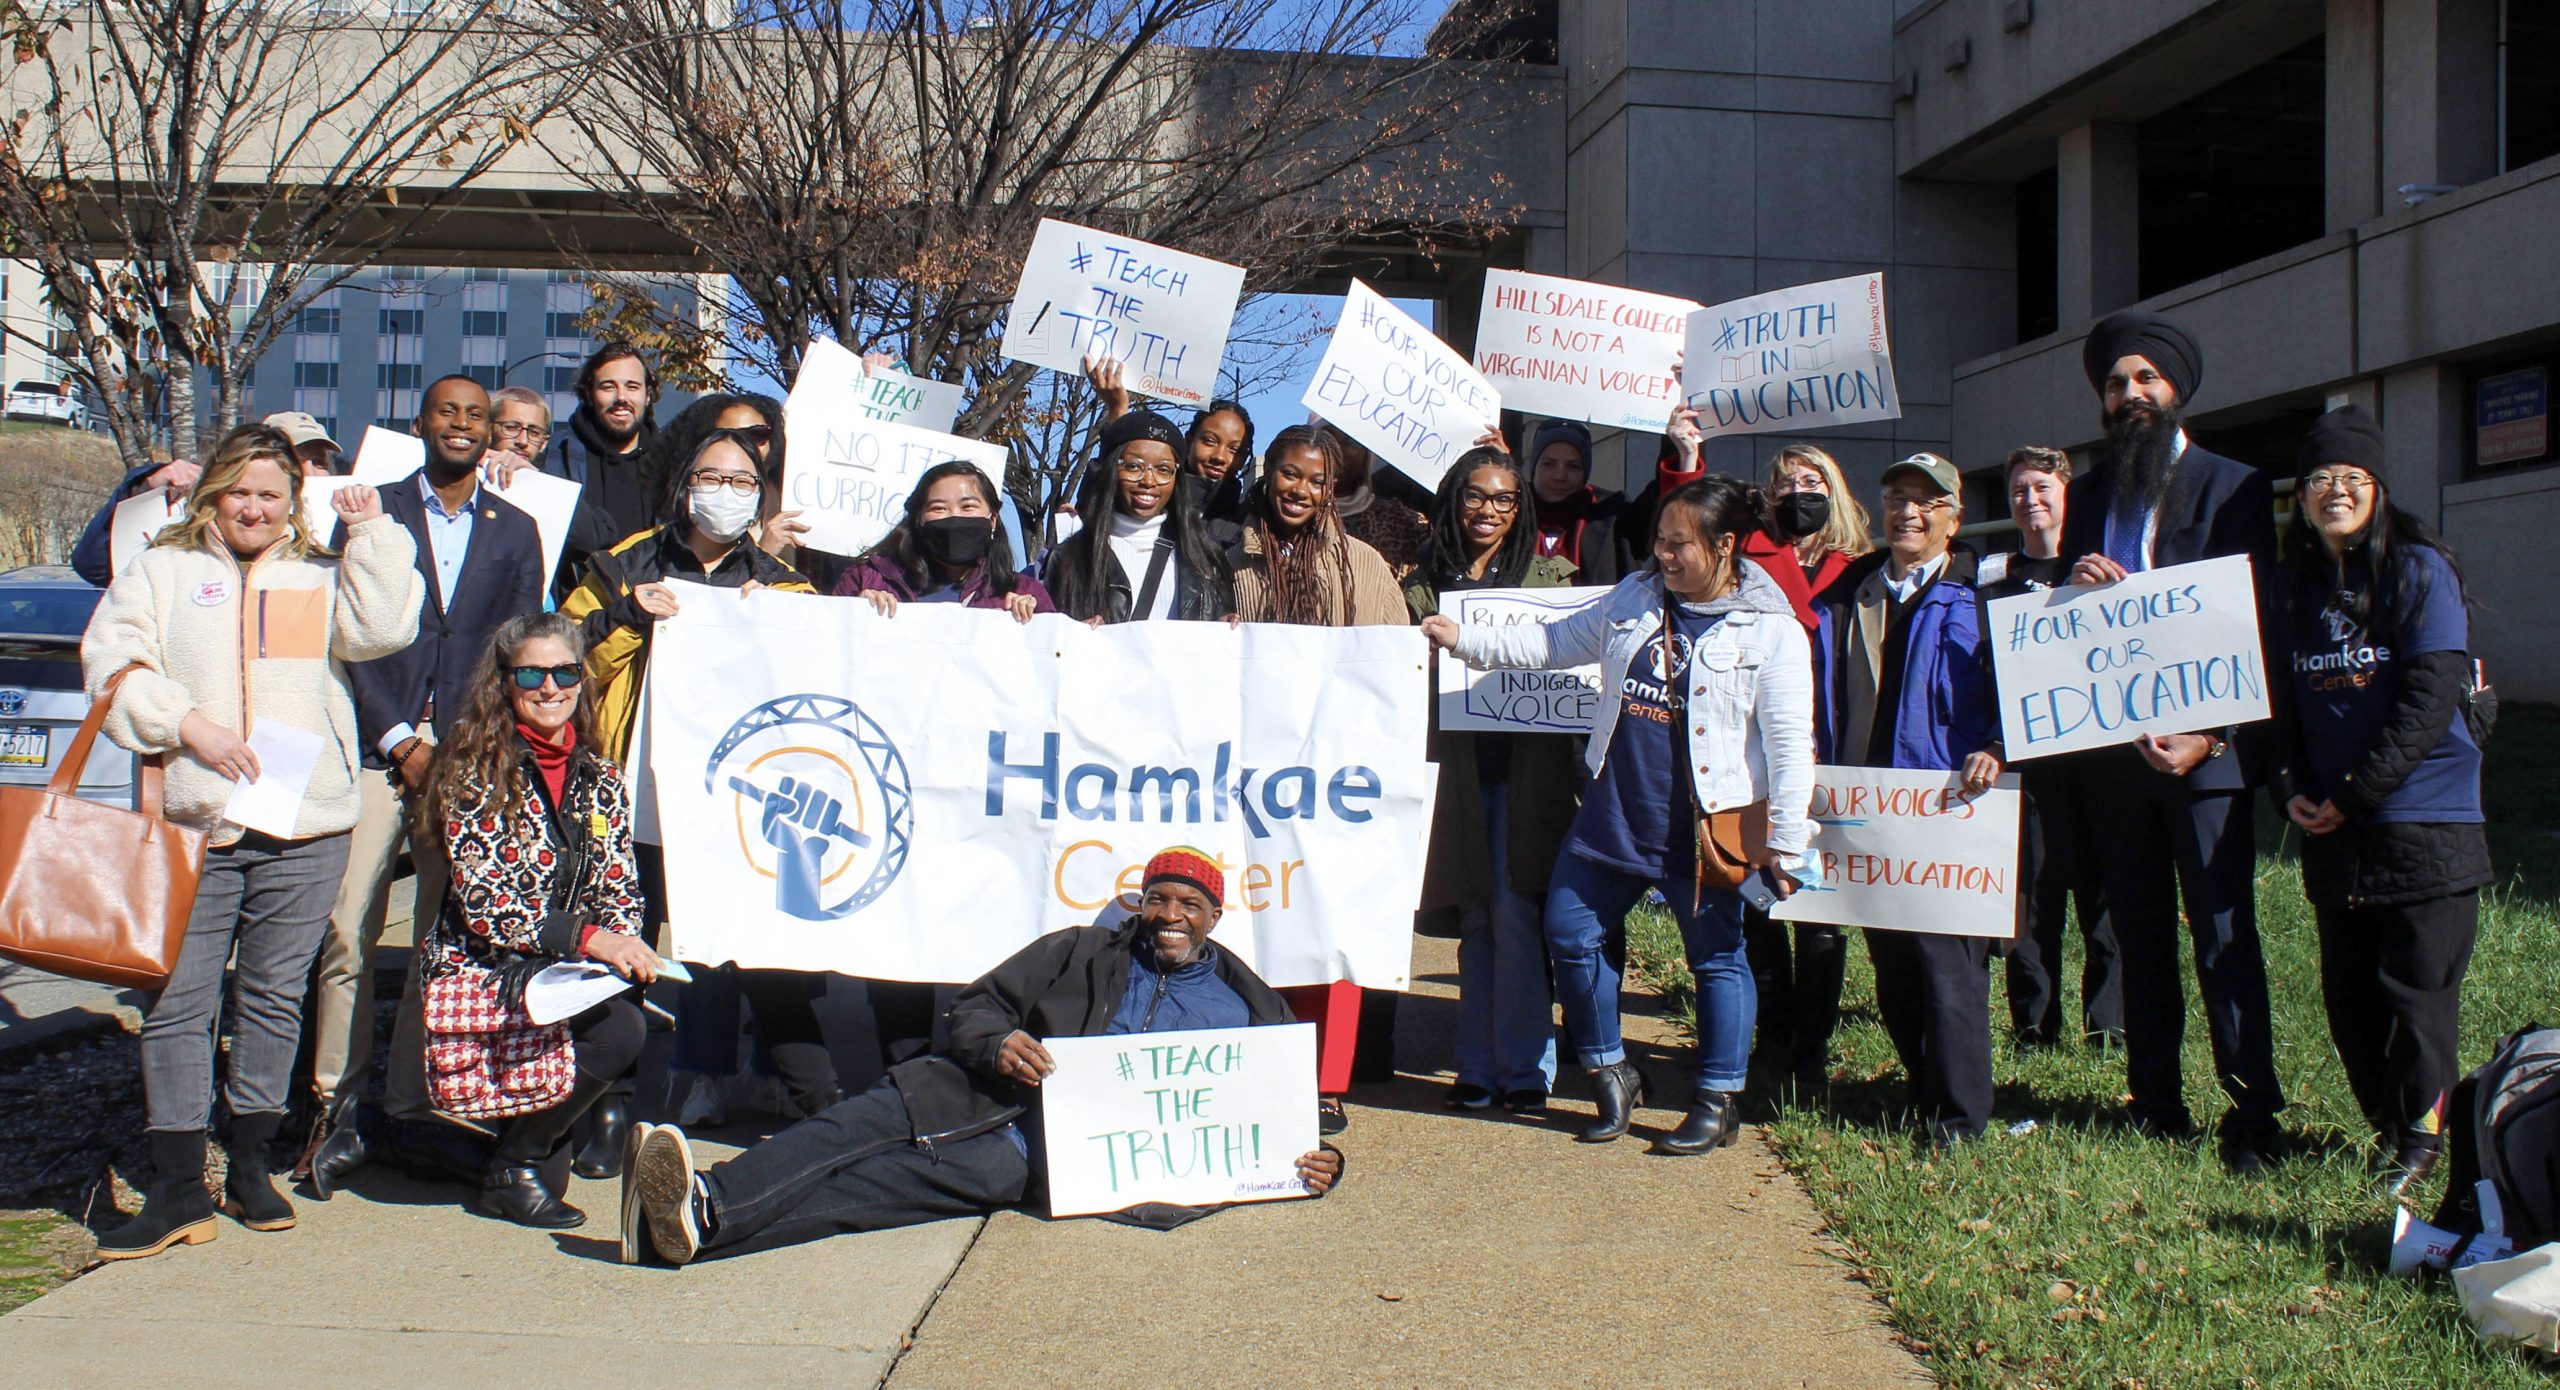 Group photo of attendees with their signs at the Rally for Our Voices, Our Education in Richmond, VA on November 17, 2022.